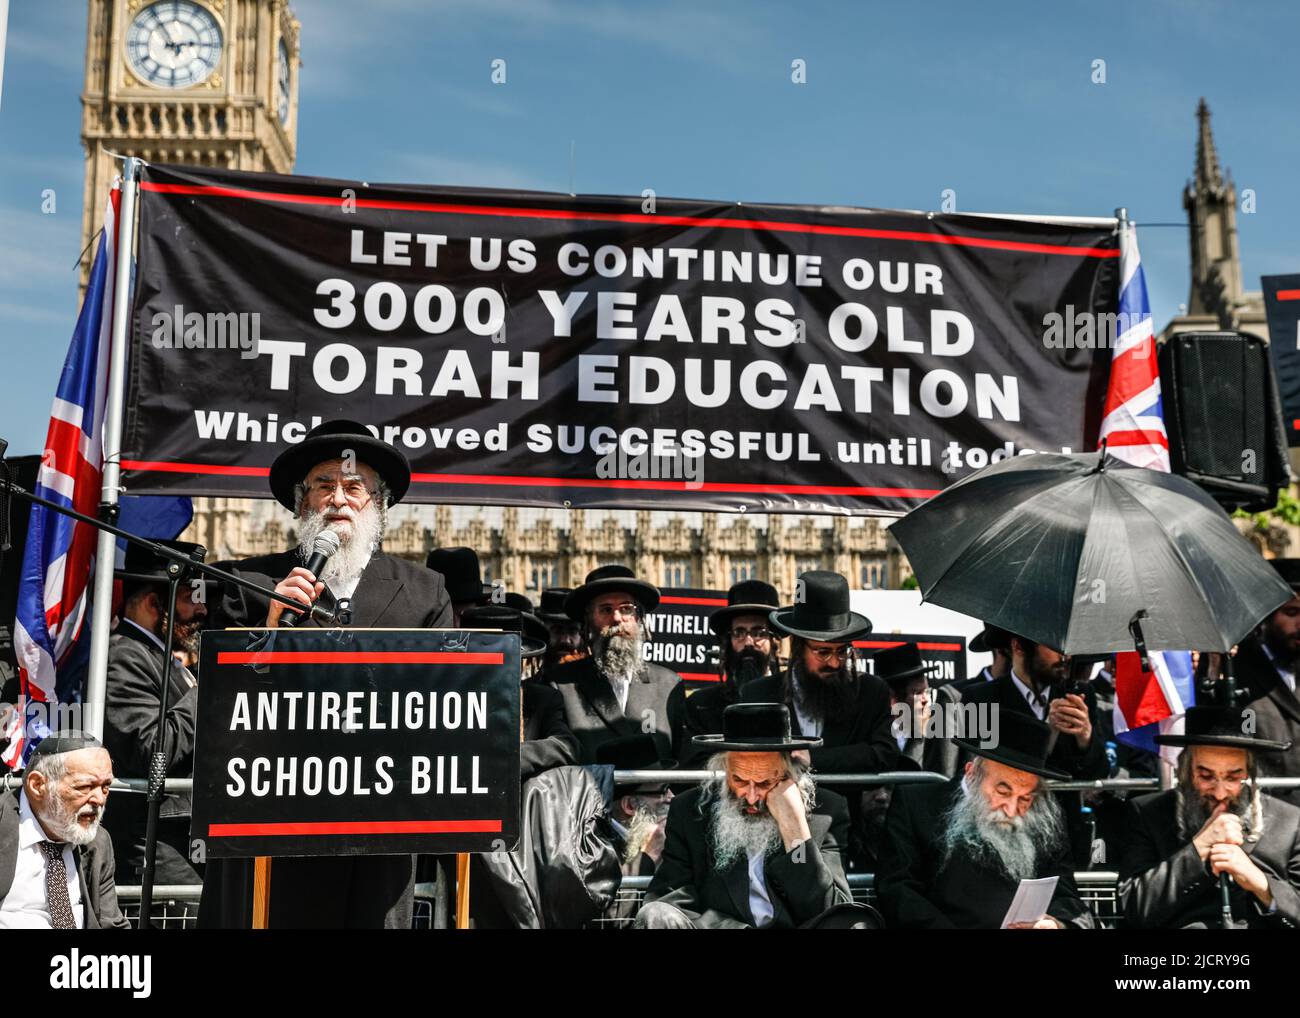 London, UK. 15th June, 2022. Rabbi Schlesinger speaks. A delegation of Jewish Rabbies, accompanied by Haredi orthodox members of the Jewish community from the UK, have assembled outside Parliament to protest against the Schools Bill 2022, which is going through the House of Lords. The group perceive the Schools Bill as a threat to fundamental aspects of Jewish practice and religious principles in religious schools. Credit: Imageplotter/Alamy Live News Stock Photo